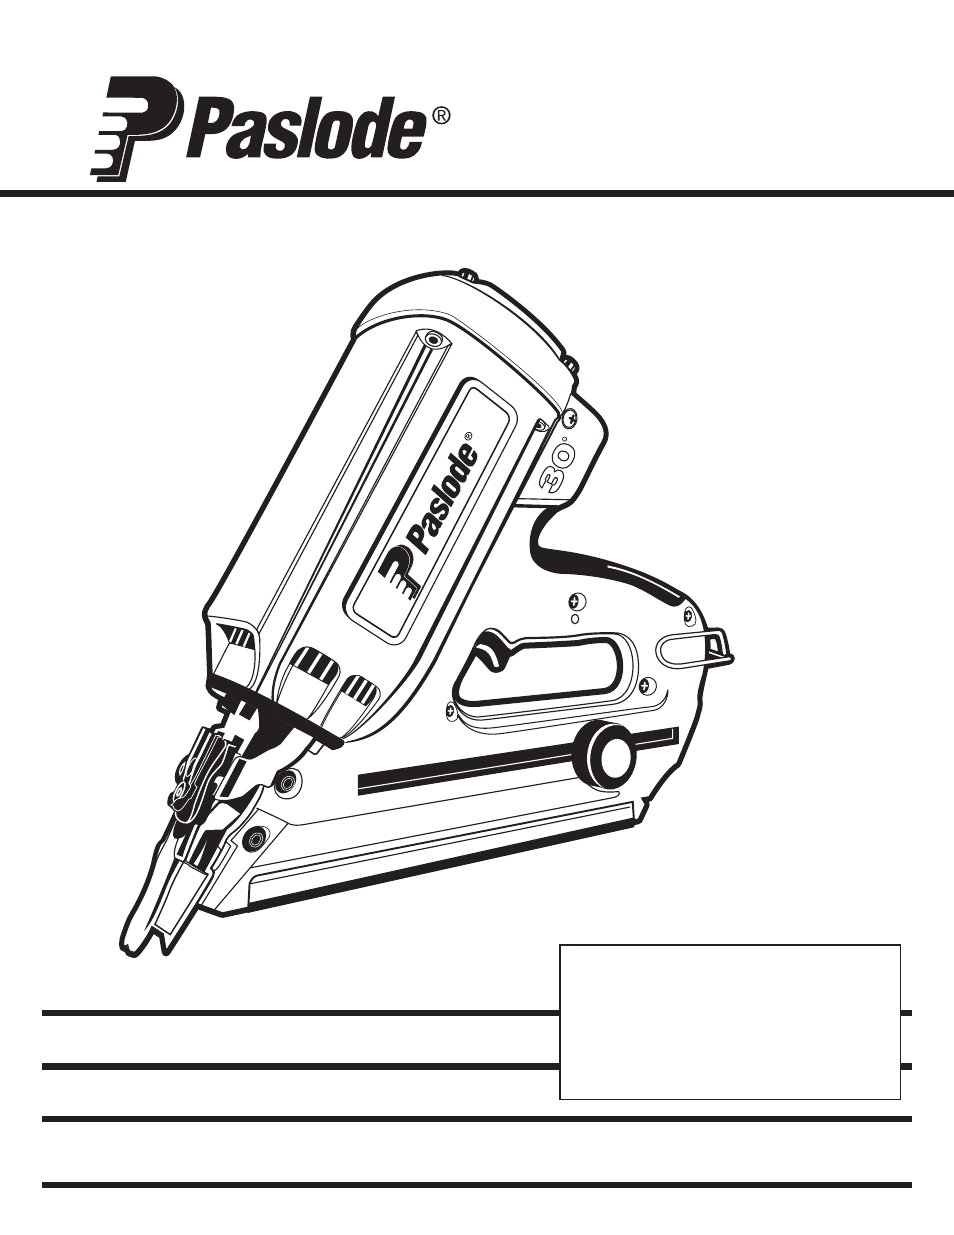 Paslode IMCT Cordless Framing Nailer User Manual | 20 pages | Also for